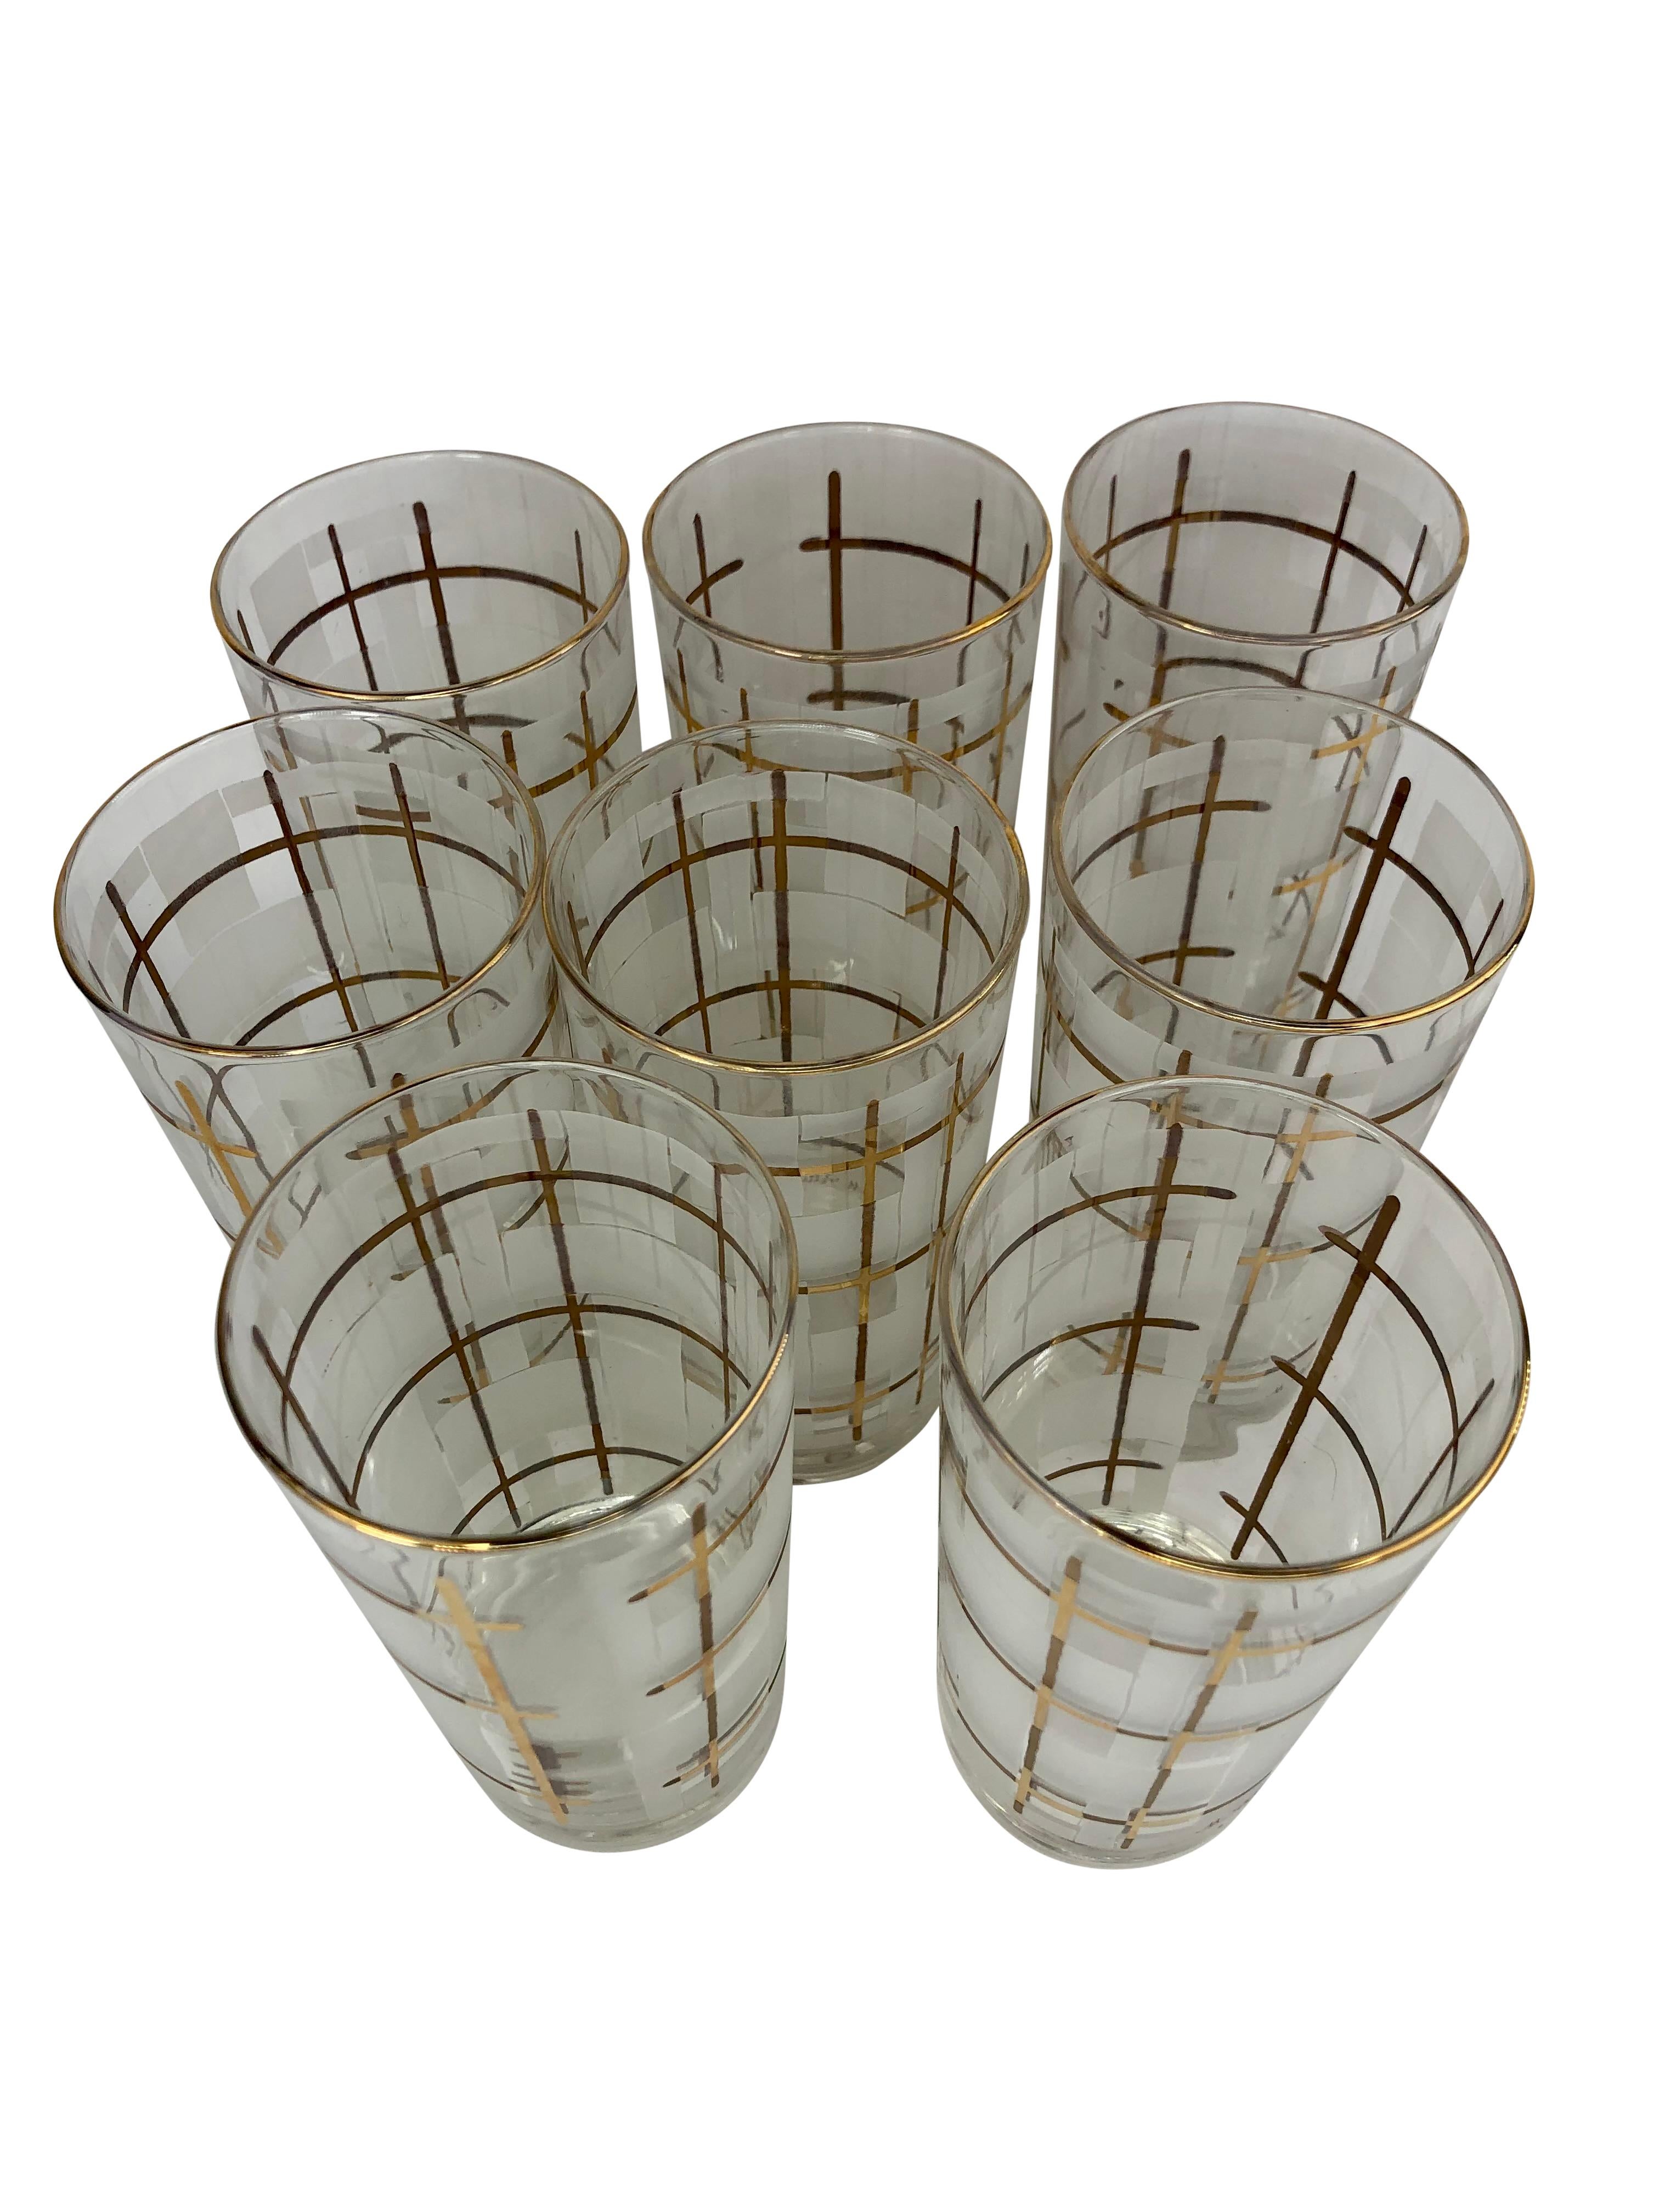 Set of 8 Vintage Libbey M. Petti Signed Highball Glasses with Gilt and Frosted Checkerboard Design. Glasses measure 5 1/2